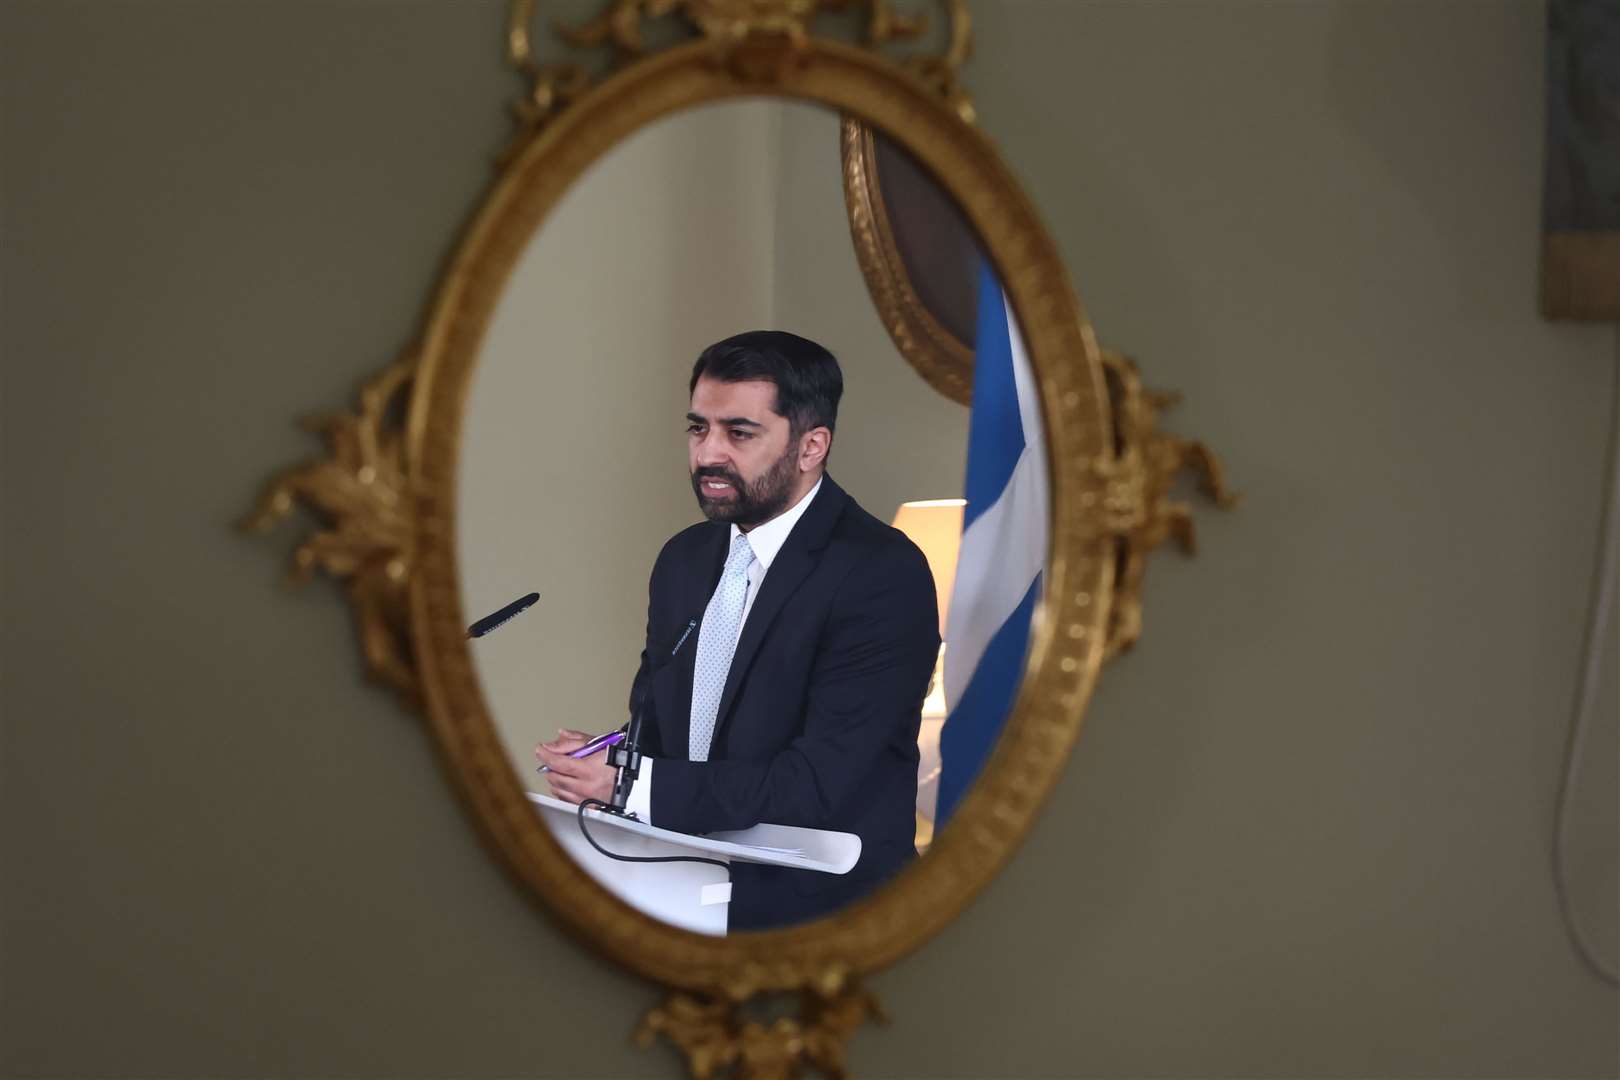 Humza Yousaf was said to be in a ‘reflective’ mood after his decision to end a powersharing agreement sparked a no confidence motion in his leadership (Jeff J Mitchell/PA)